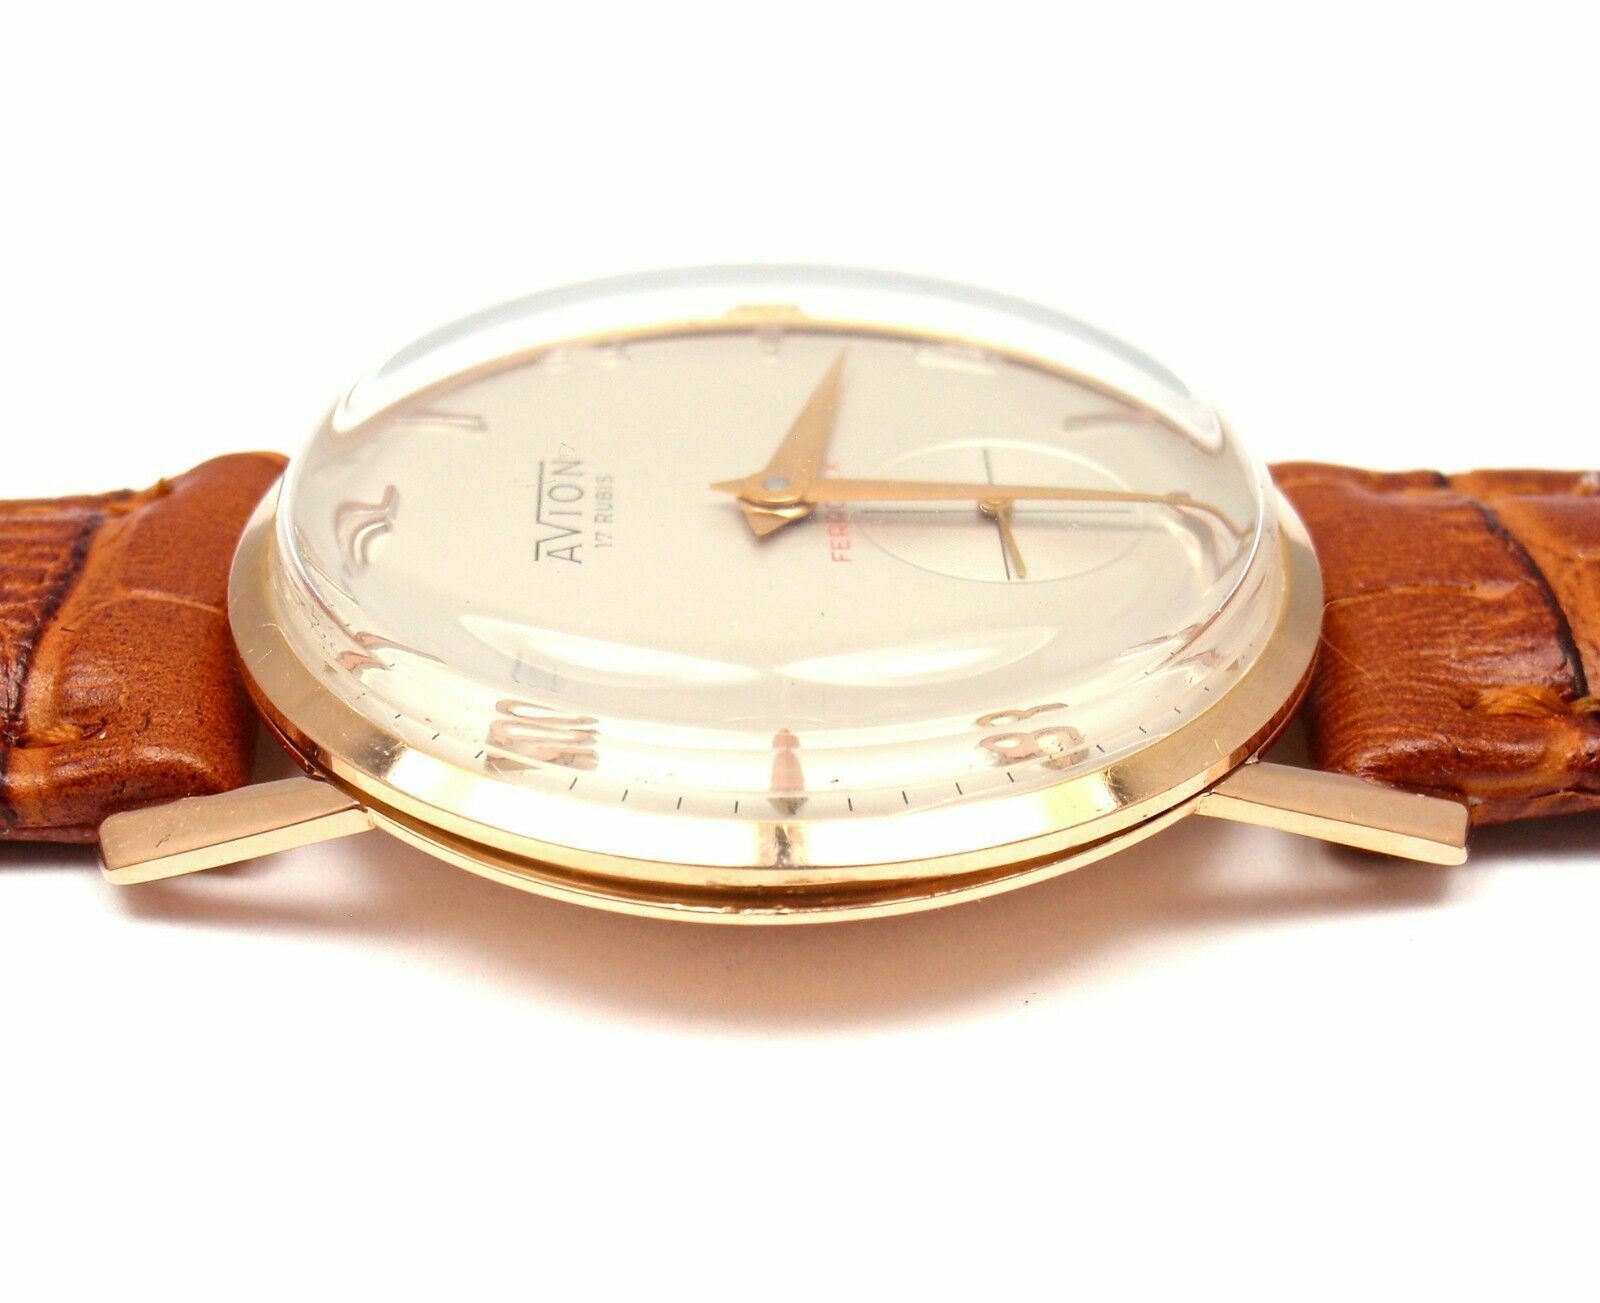 Ferrotex Jewelry & Watches:Watches, Parts & Accessories:Watches:Wristwatches Authentic! Ferrotex Avion 18k Yellow Gold Manual Wind 17j Watch